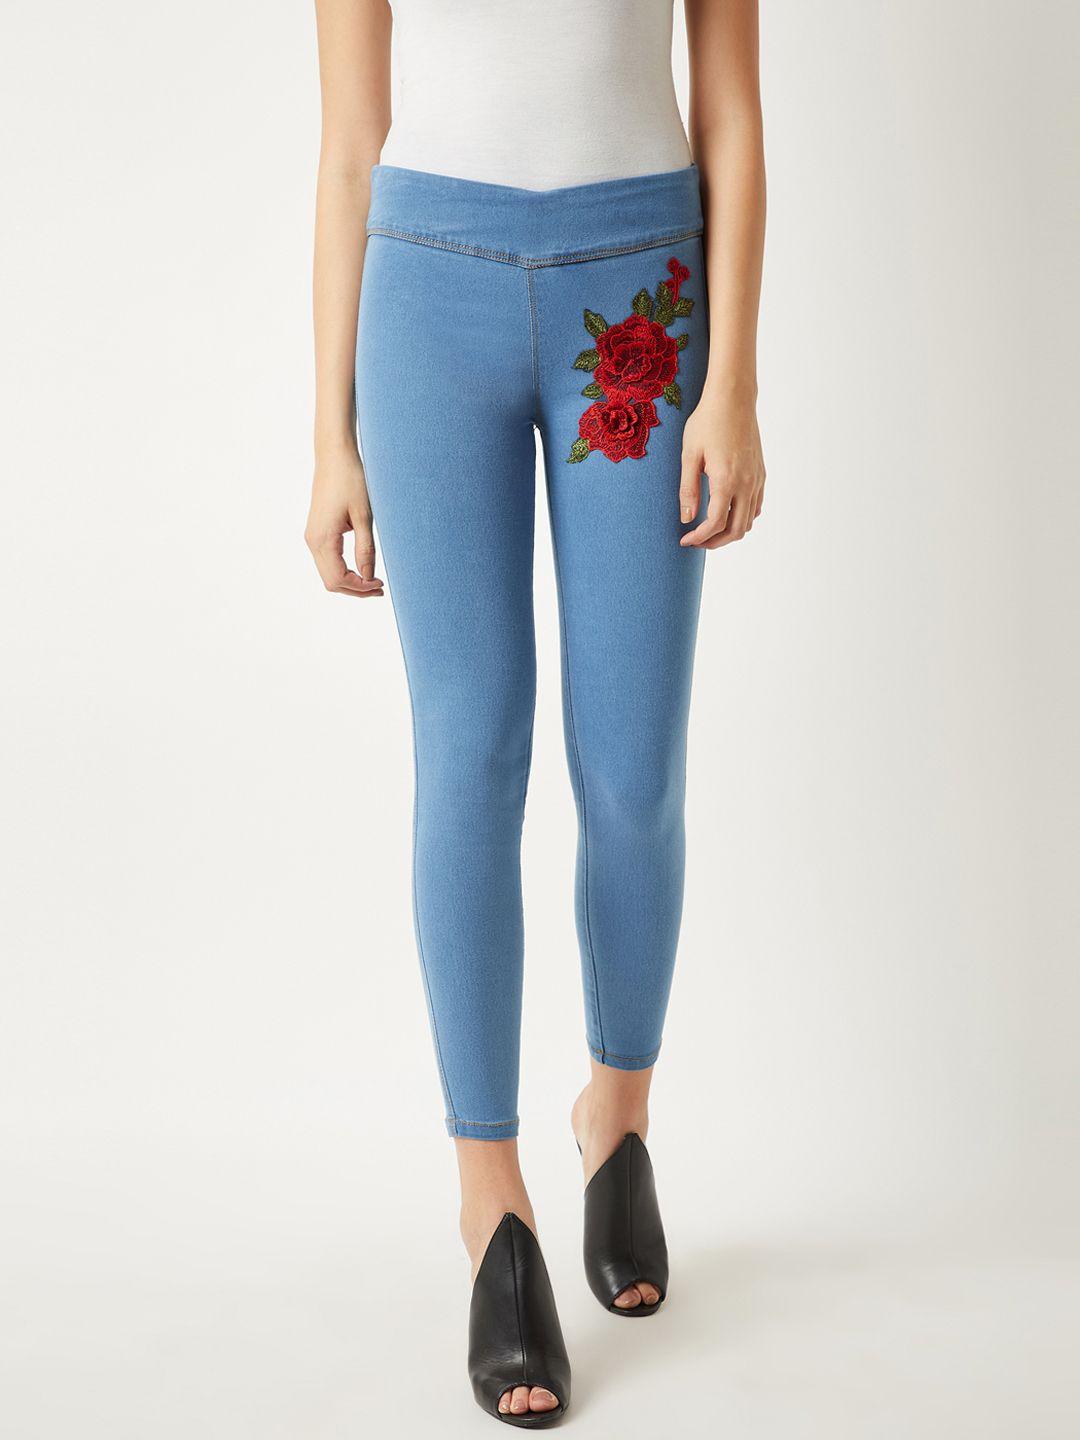 miss-chase-blue-skinny-fit-embroidered-jeggings